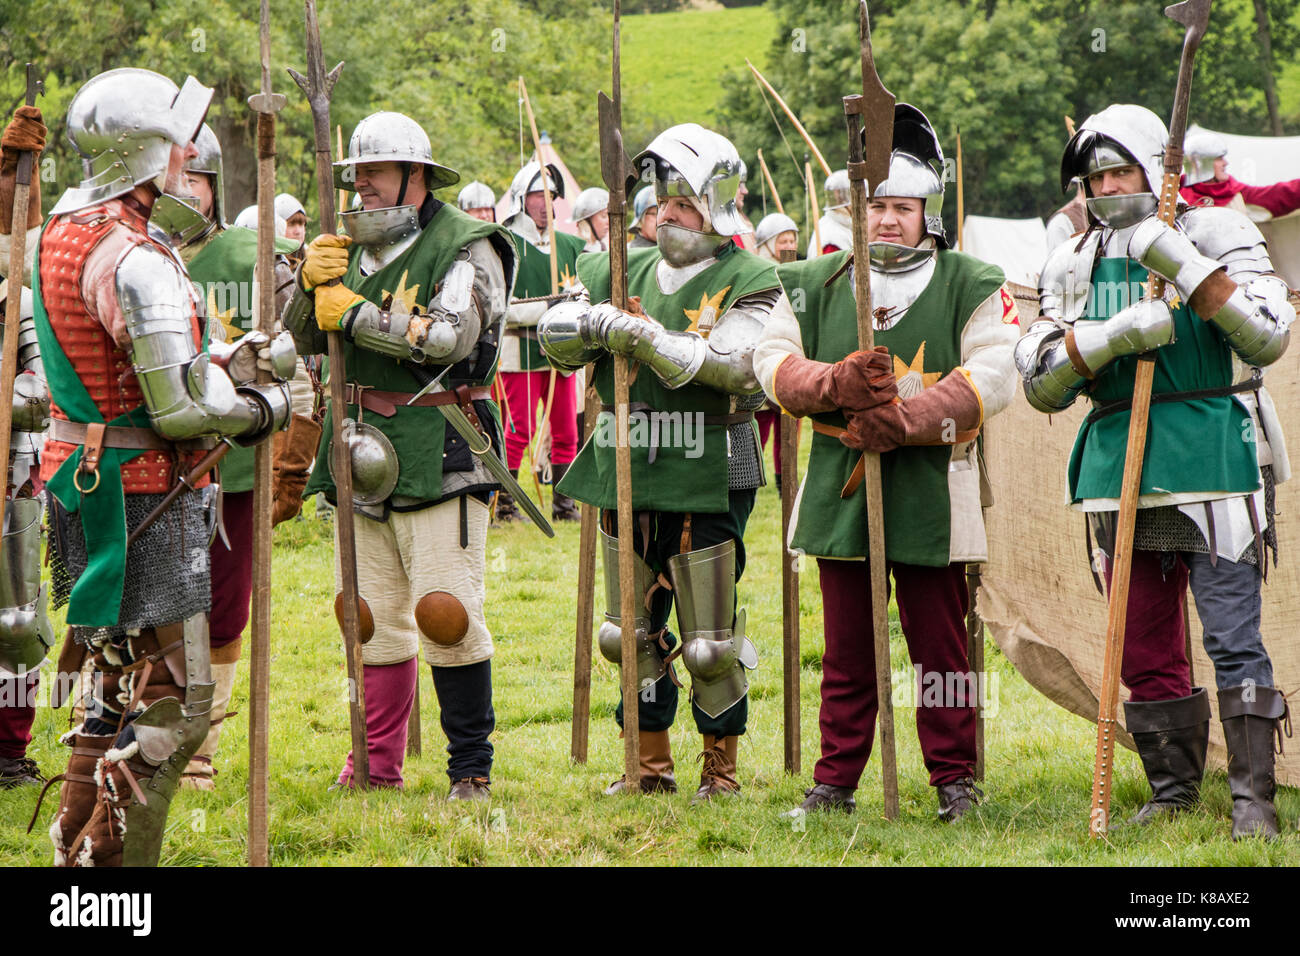 War of the Roses medieval re-enactment group, England, UK Stock Photo